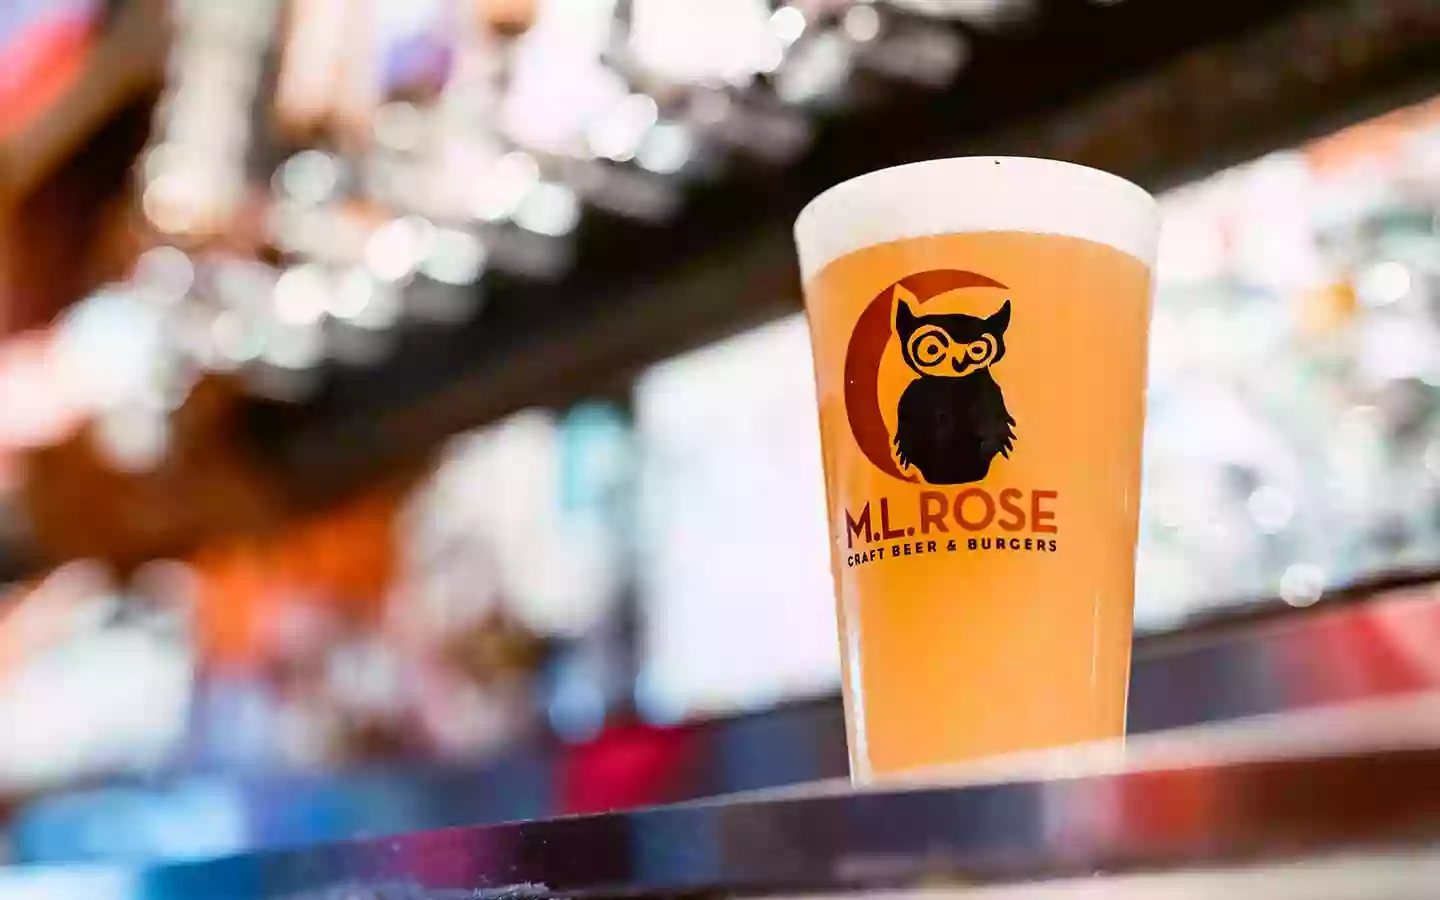 M.L.Rose Craft Beer & Burgers - Providence